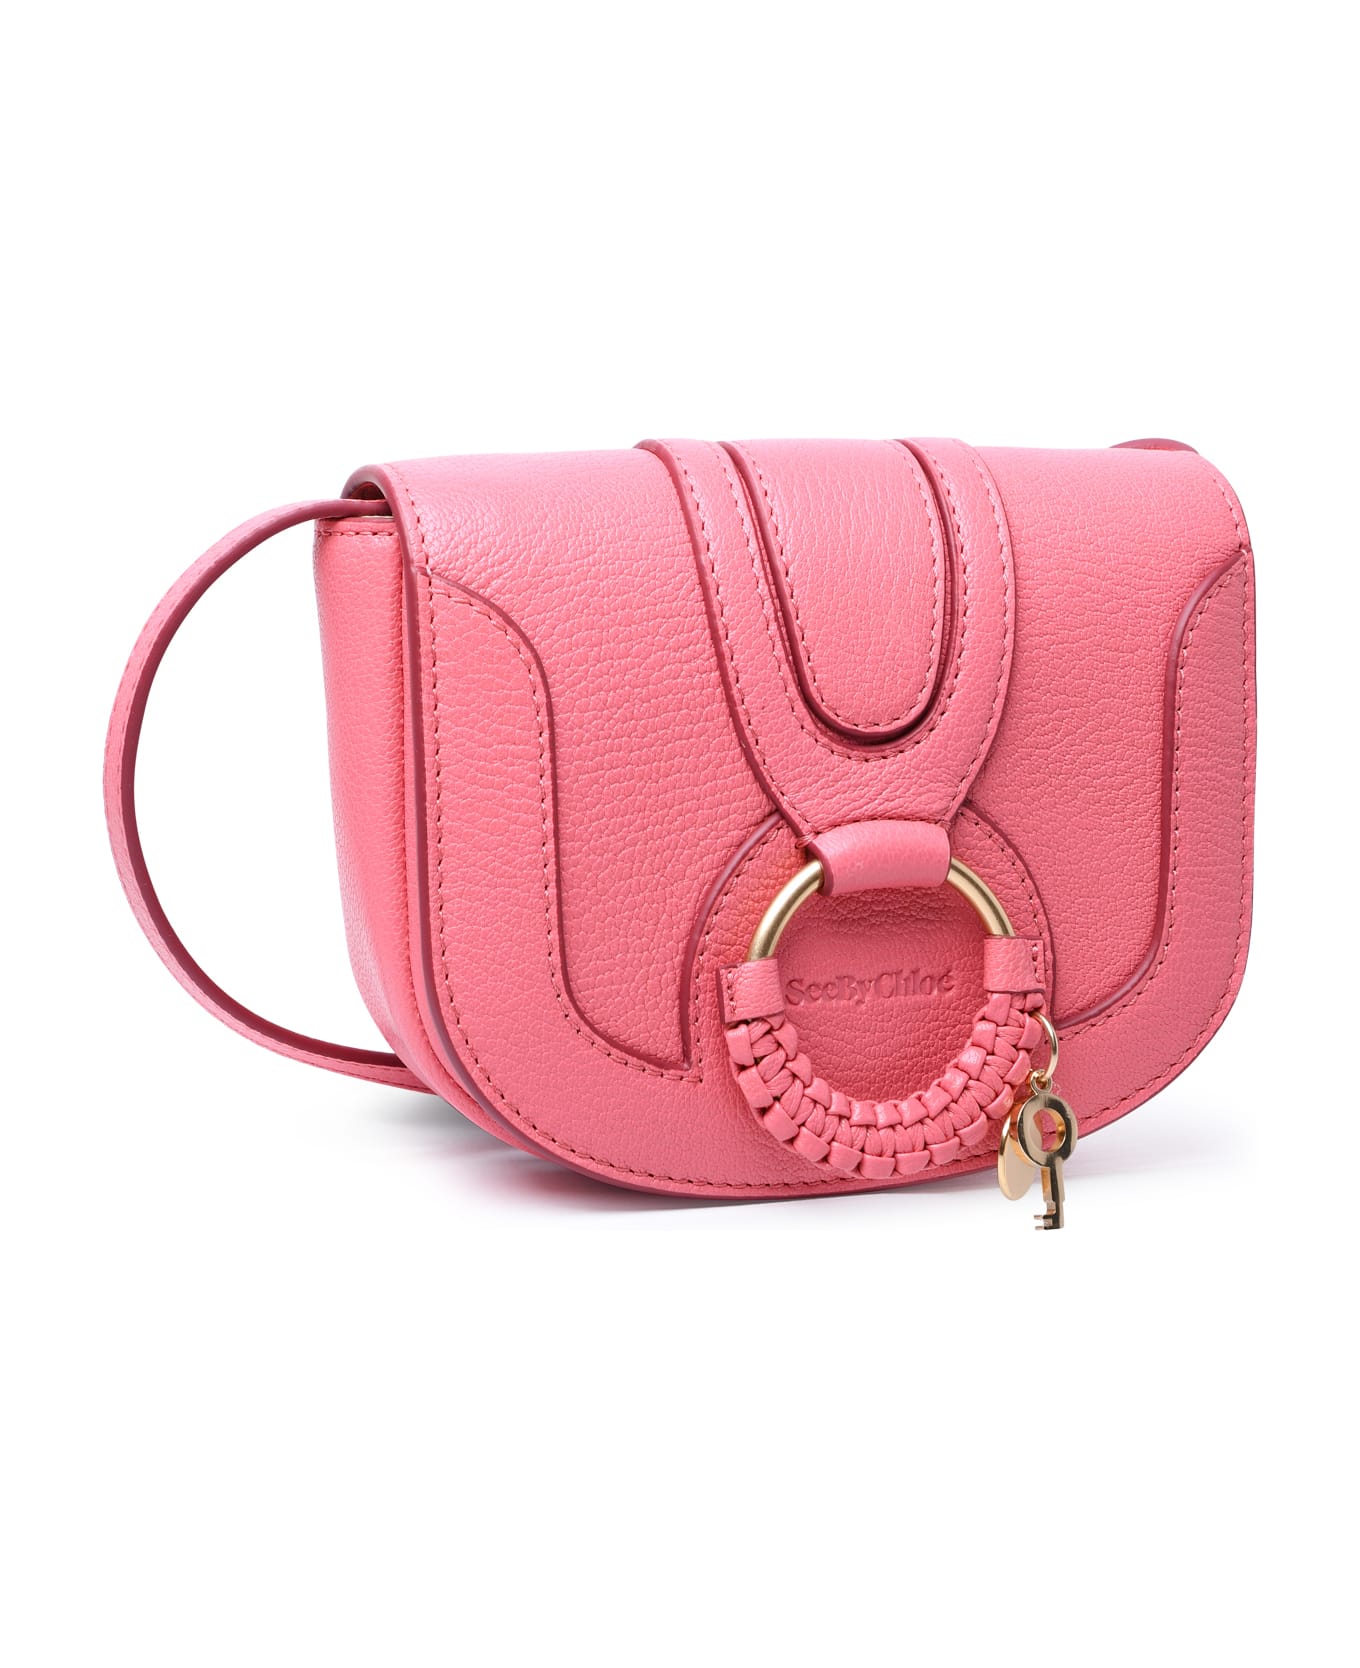 See by Chloé 'hana' Pink Small Leather Bag - Pink トートバッグ